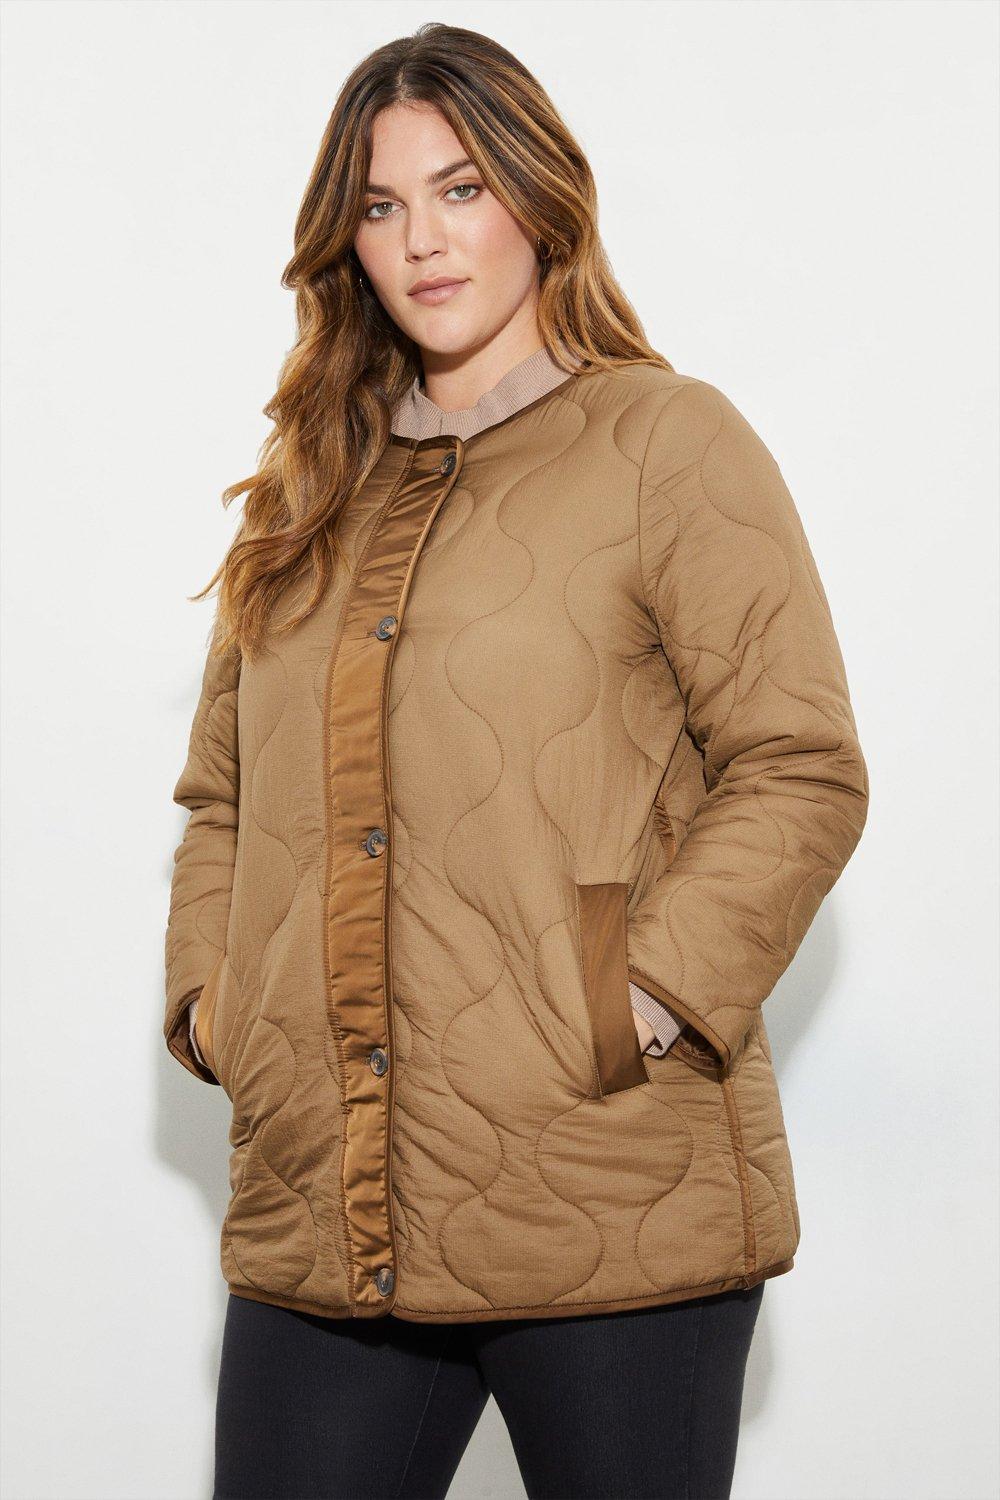 Women’s Curve Contrast Detail Quilted Jacket - chocolate - XXL